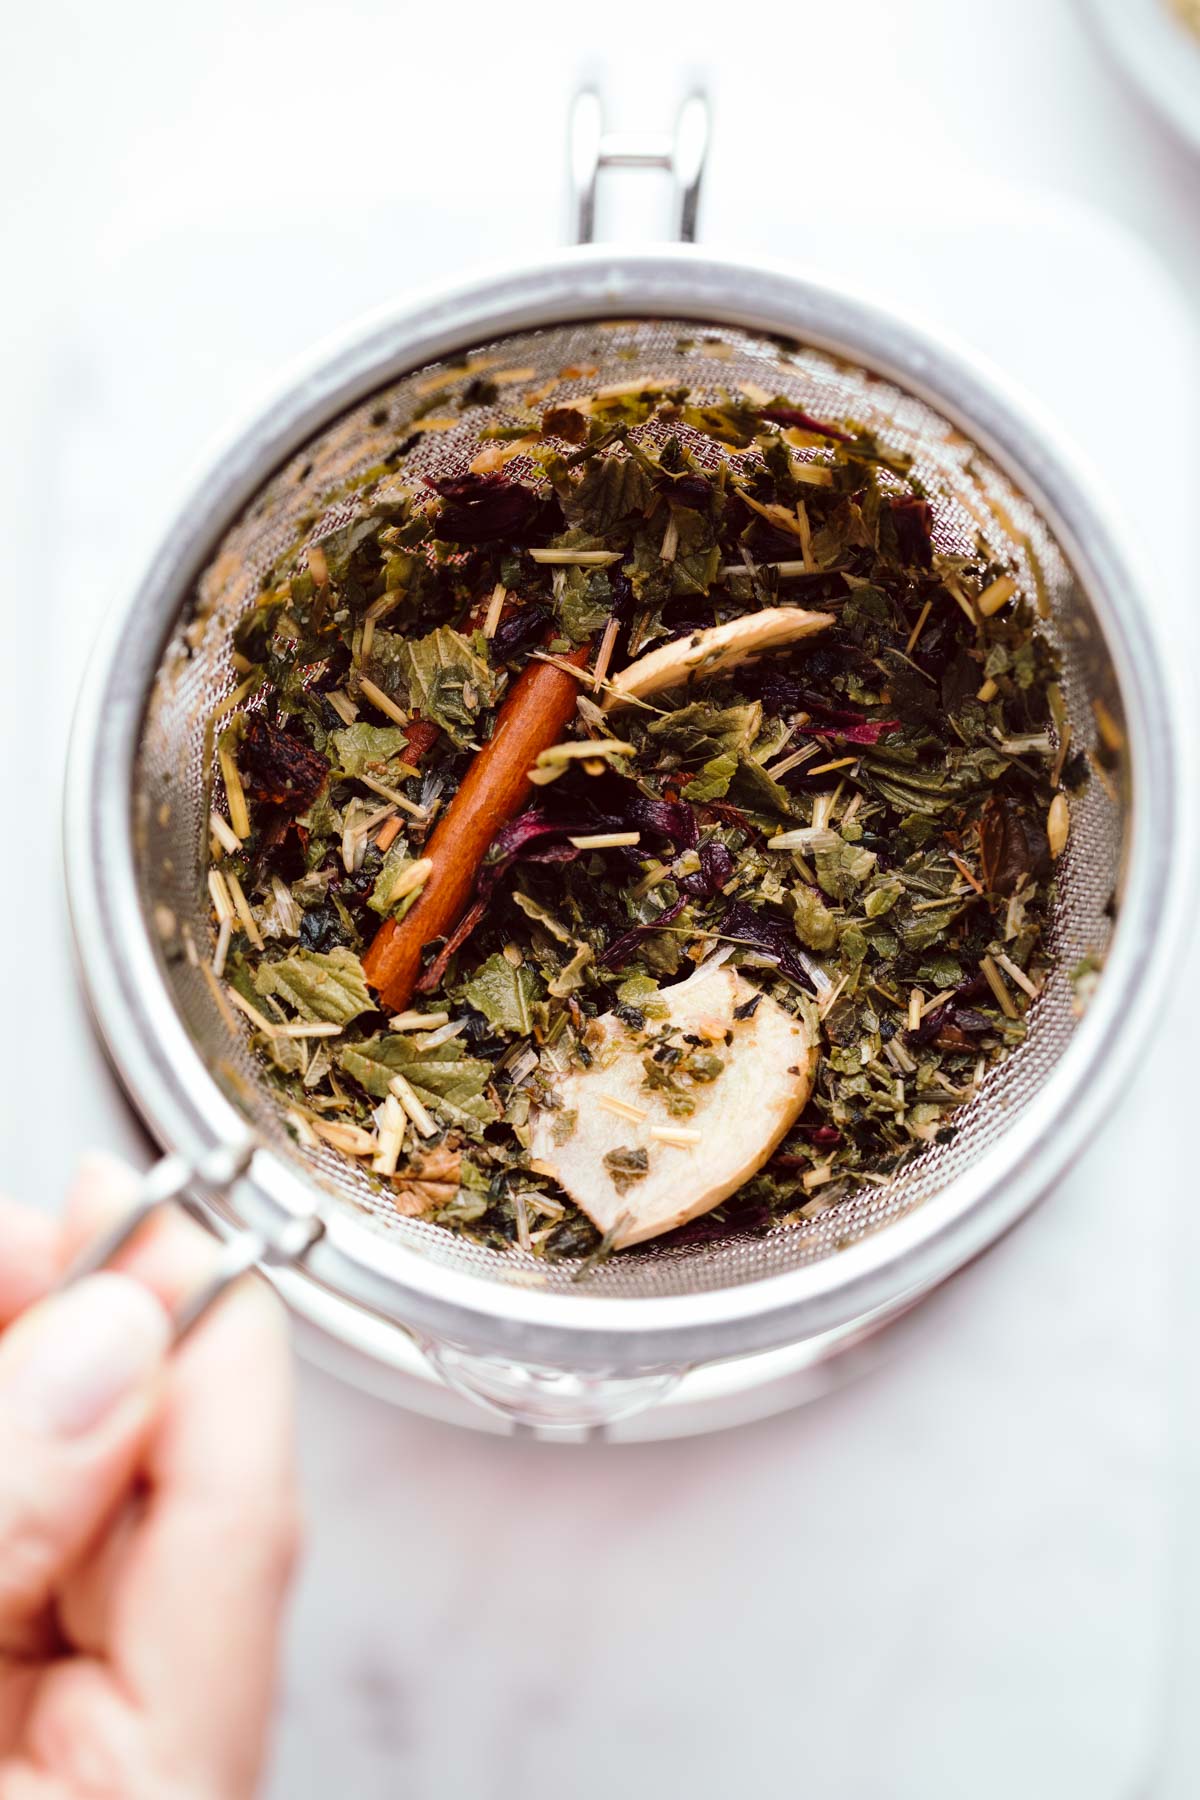 A large strainer with wet brewed herbs, a cinnamon stick and ginger pieces.